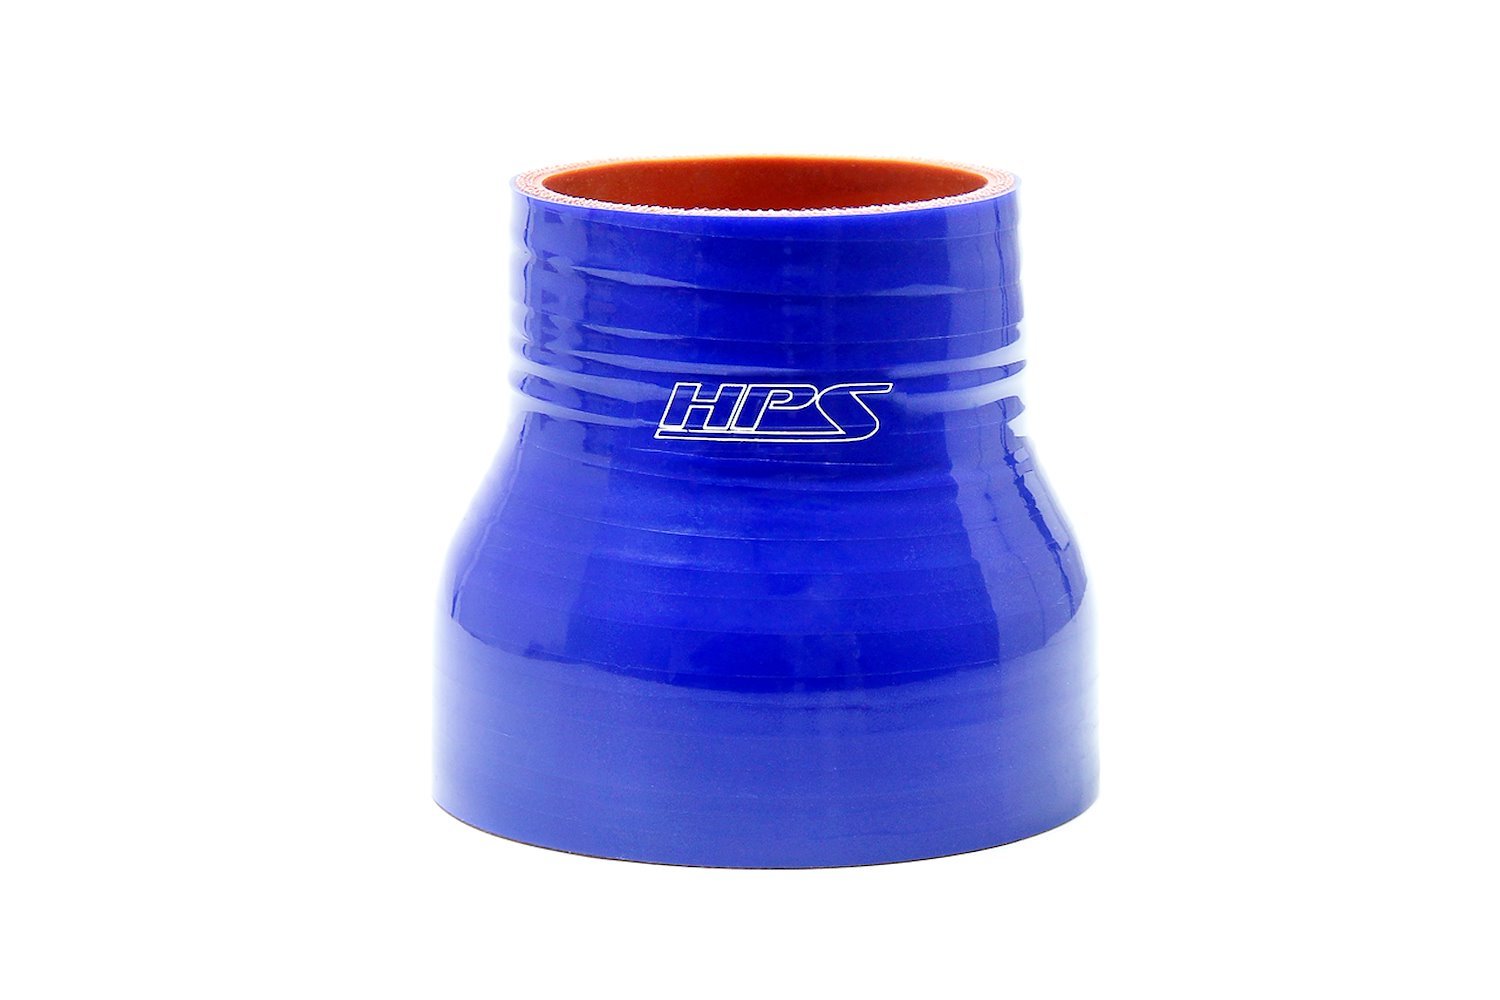 HTSR-250-275-L4-BLUE Silicone Reducer Hose, High-Temp 4-Ply Reinforced, 2-1/2 in. - 2-3/4 in. ID, 4 in. Long, Blue